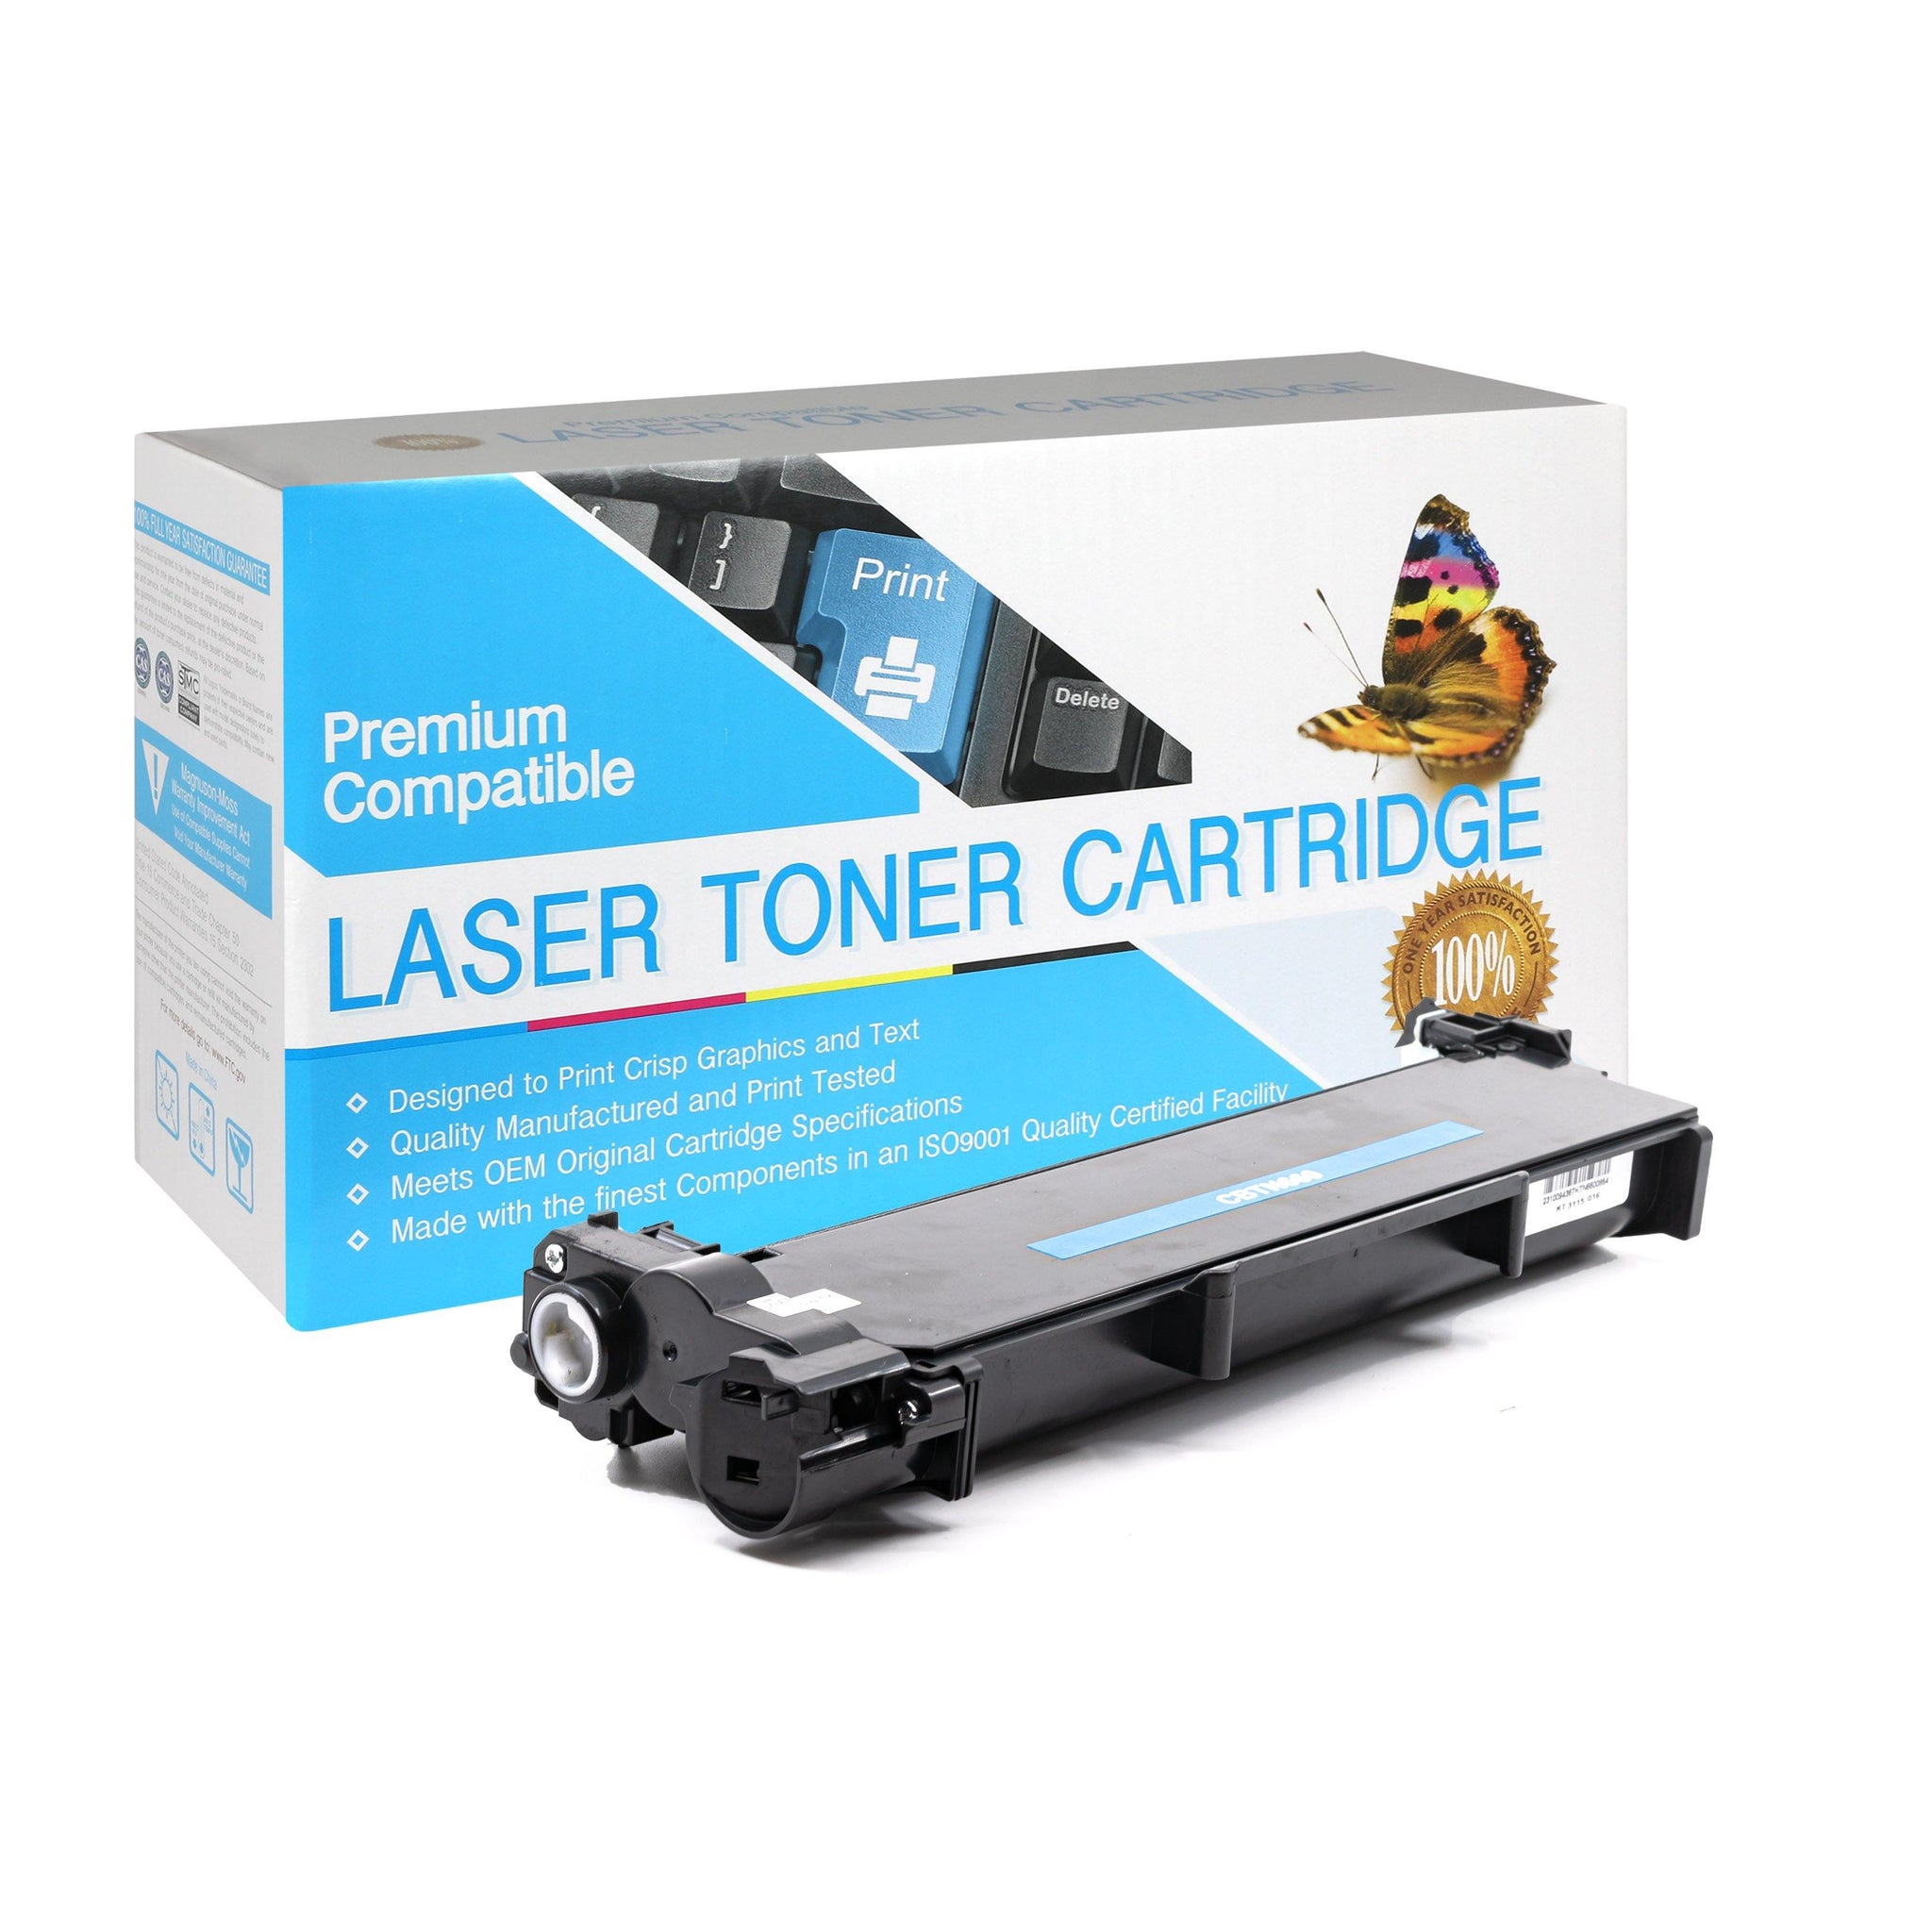 LINKYO LY-BR-V3TN660 Black Toner Cartridge - Compatible with Brother TN-660